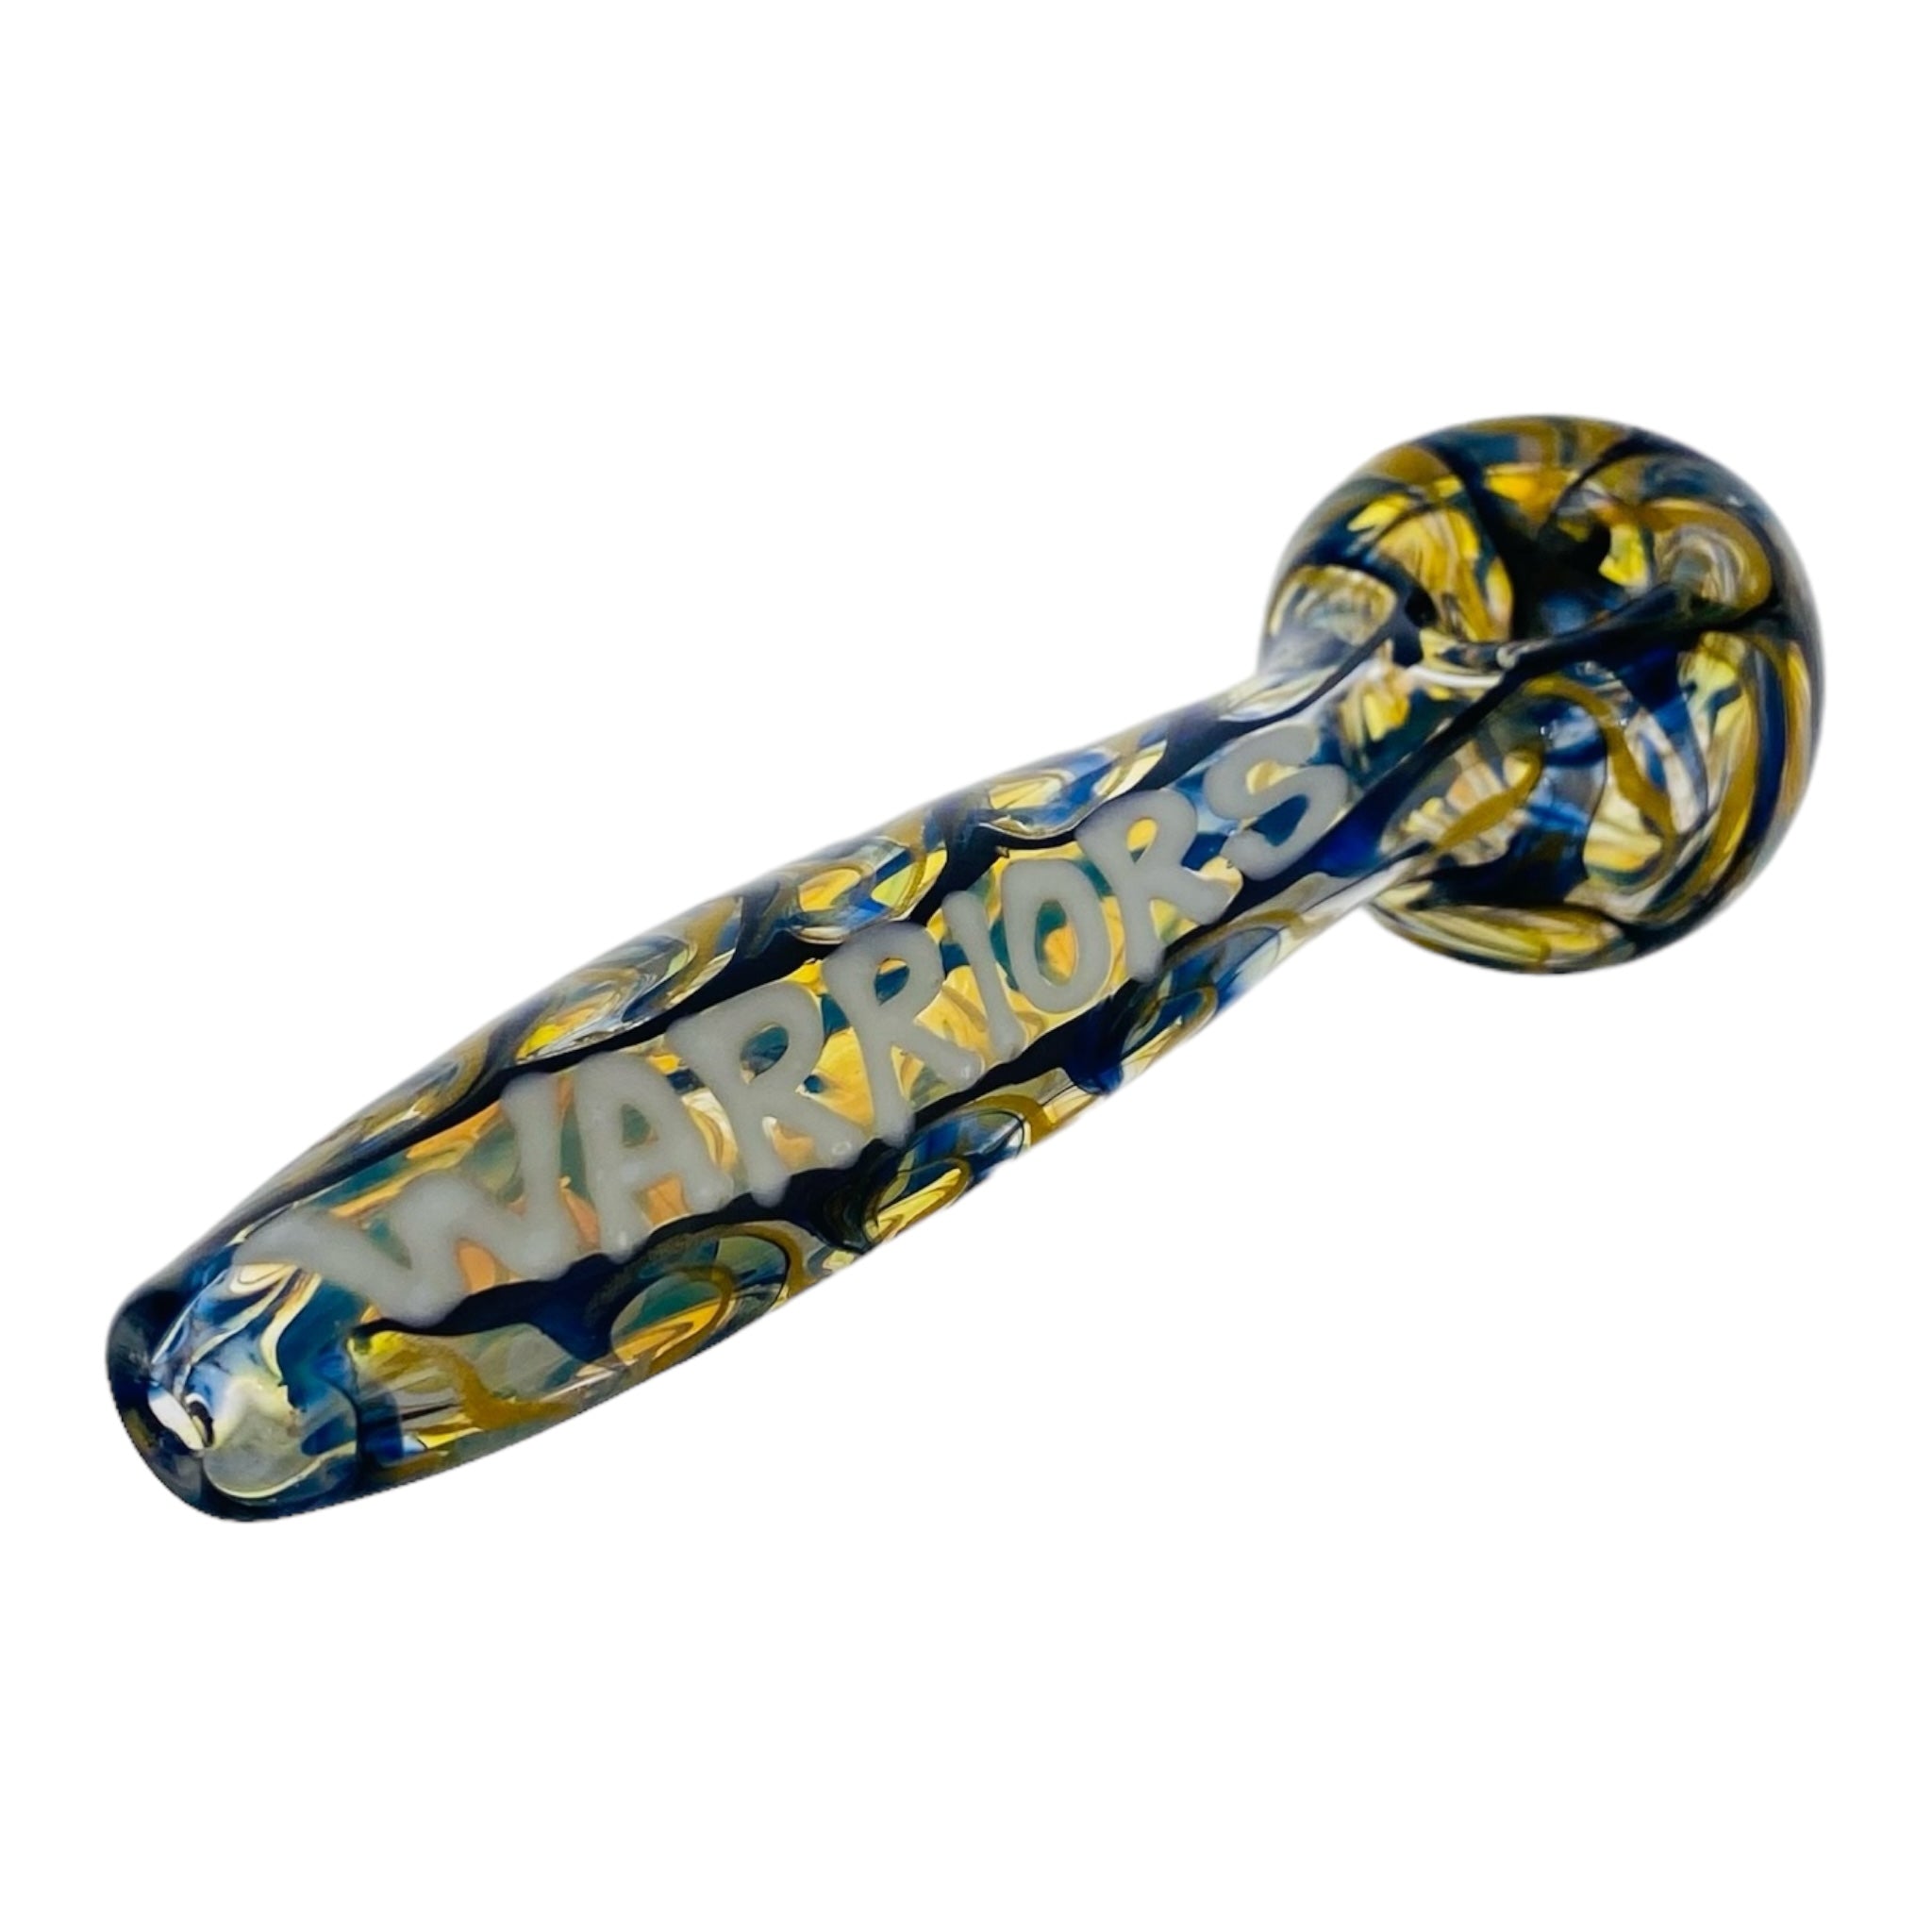 warriors glass hand pipe for weed and tobacco for sale free shipping